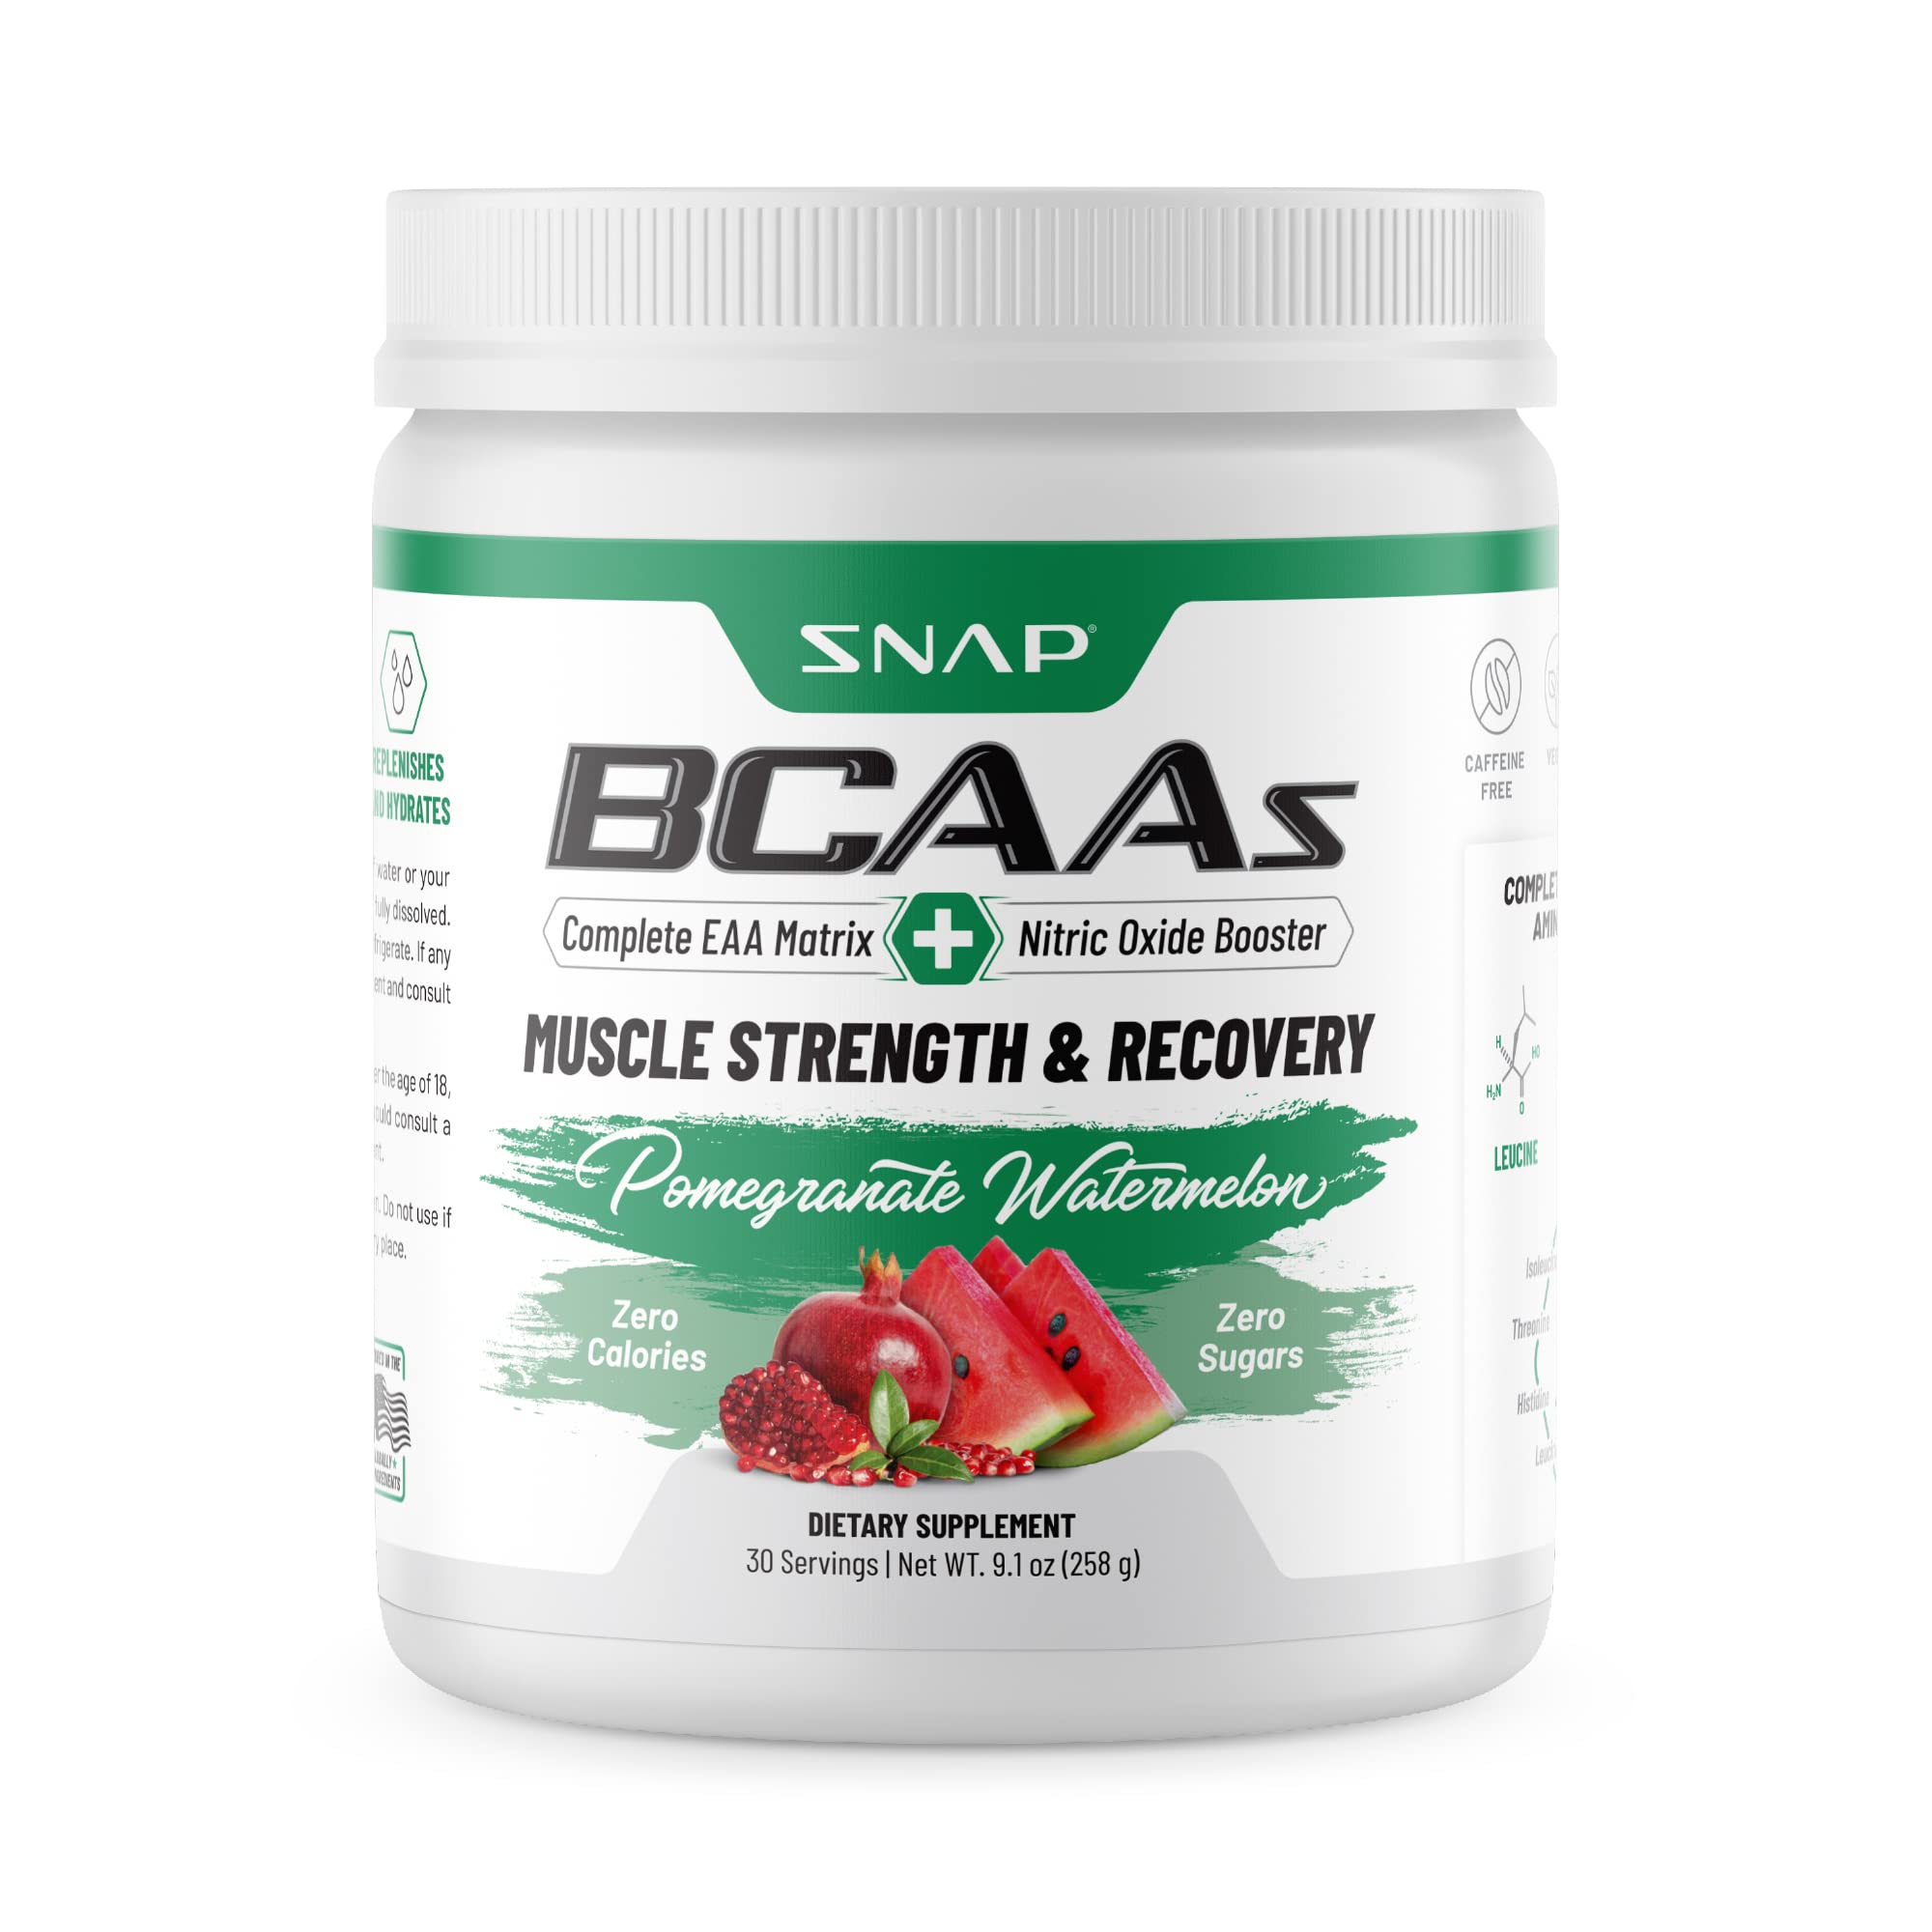 Snap BCAA Powder Essential Amino Supplement with Nitric Oxide Booster - Pre Workout Powder, Recovery Supplements Post Workout, Muscle Strength, BCAA for Women & Men (30 Servings)